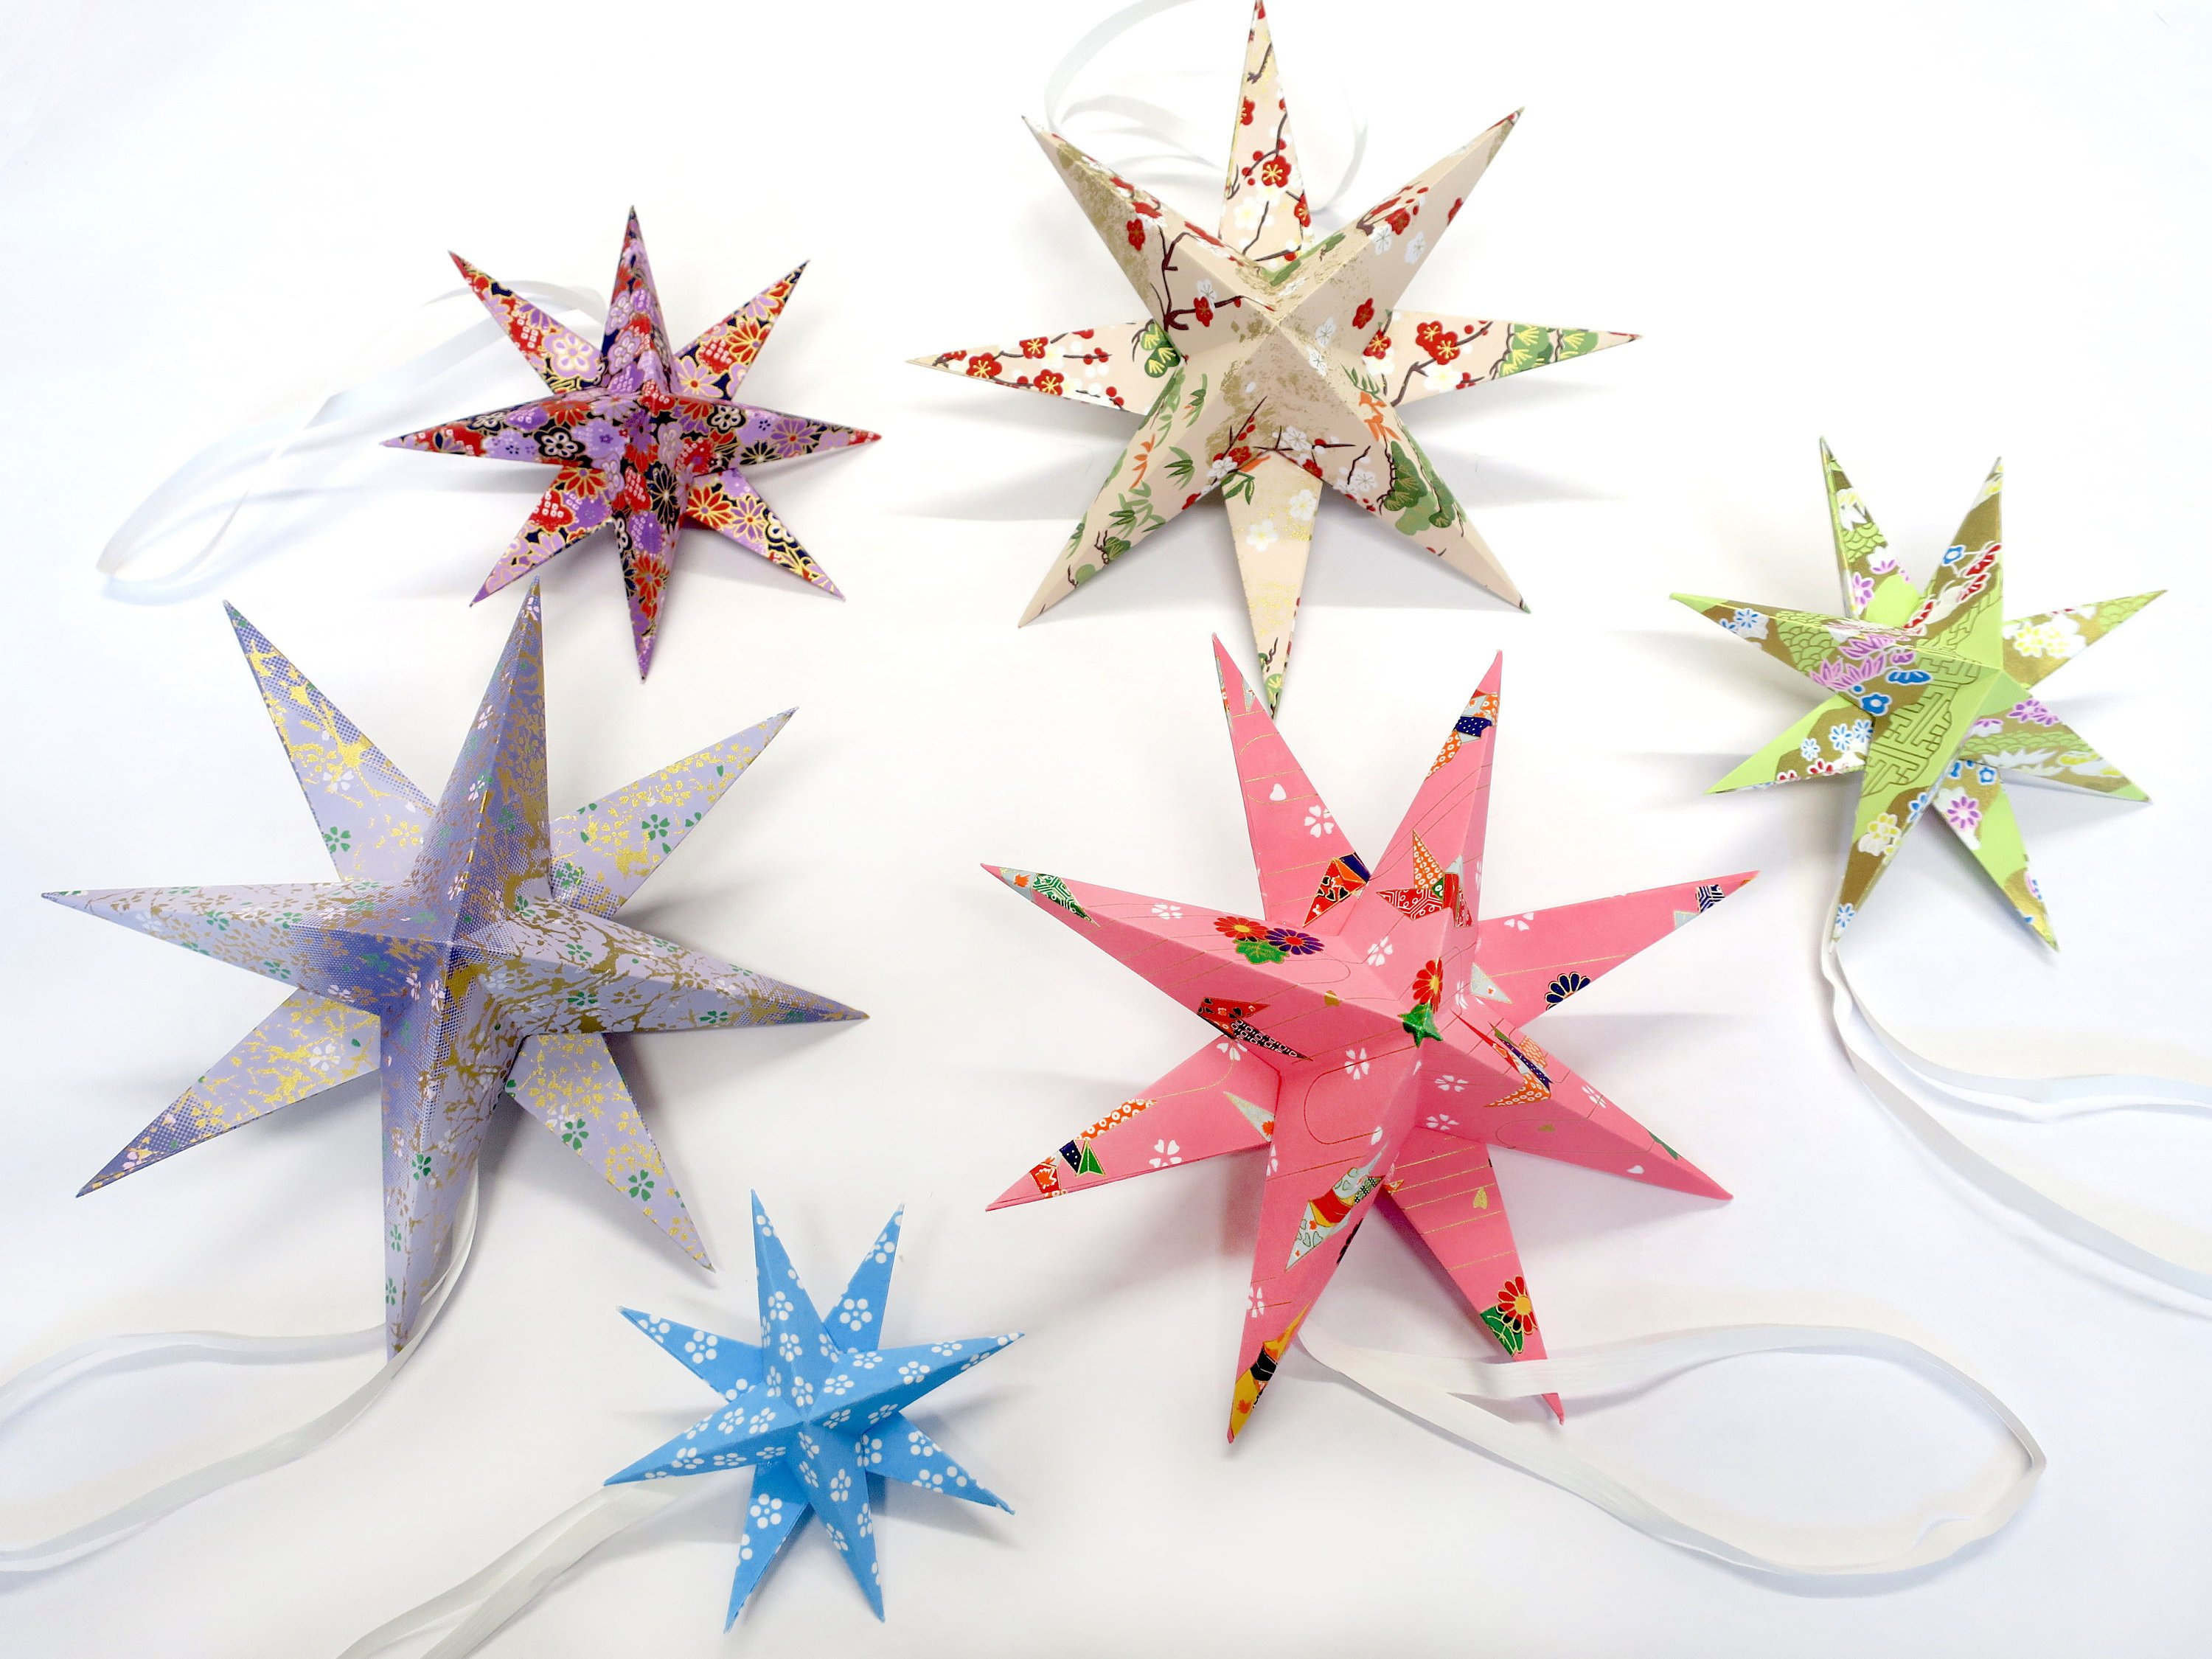 Origami Star Decorations 6 Handmade Origami Stars Hanging Decoration Homemade Gift Idea Home Decoration 3d Origami Japanese Crane Floral Nursery Mobile